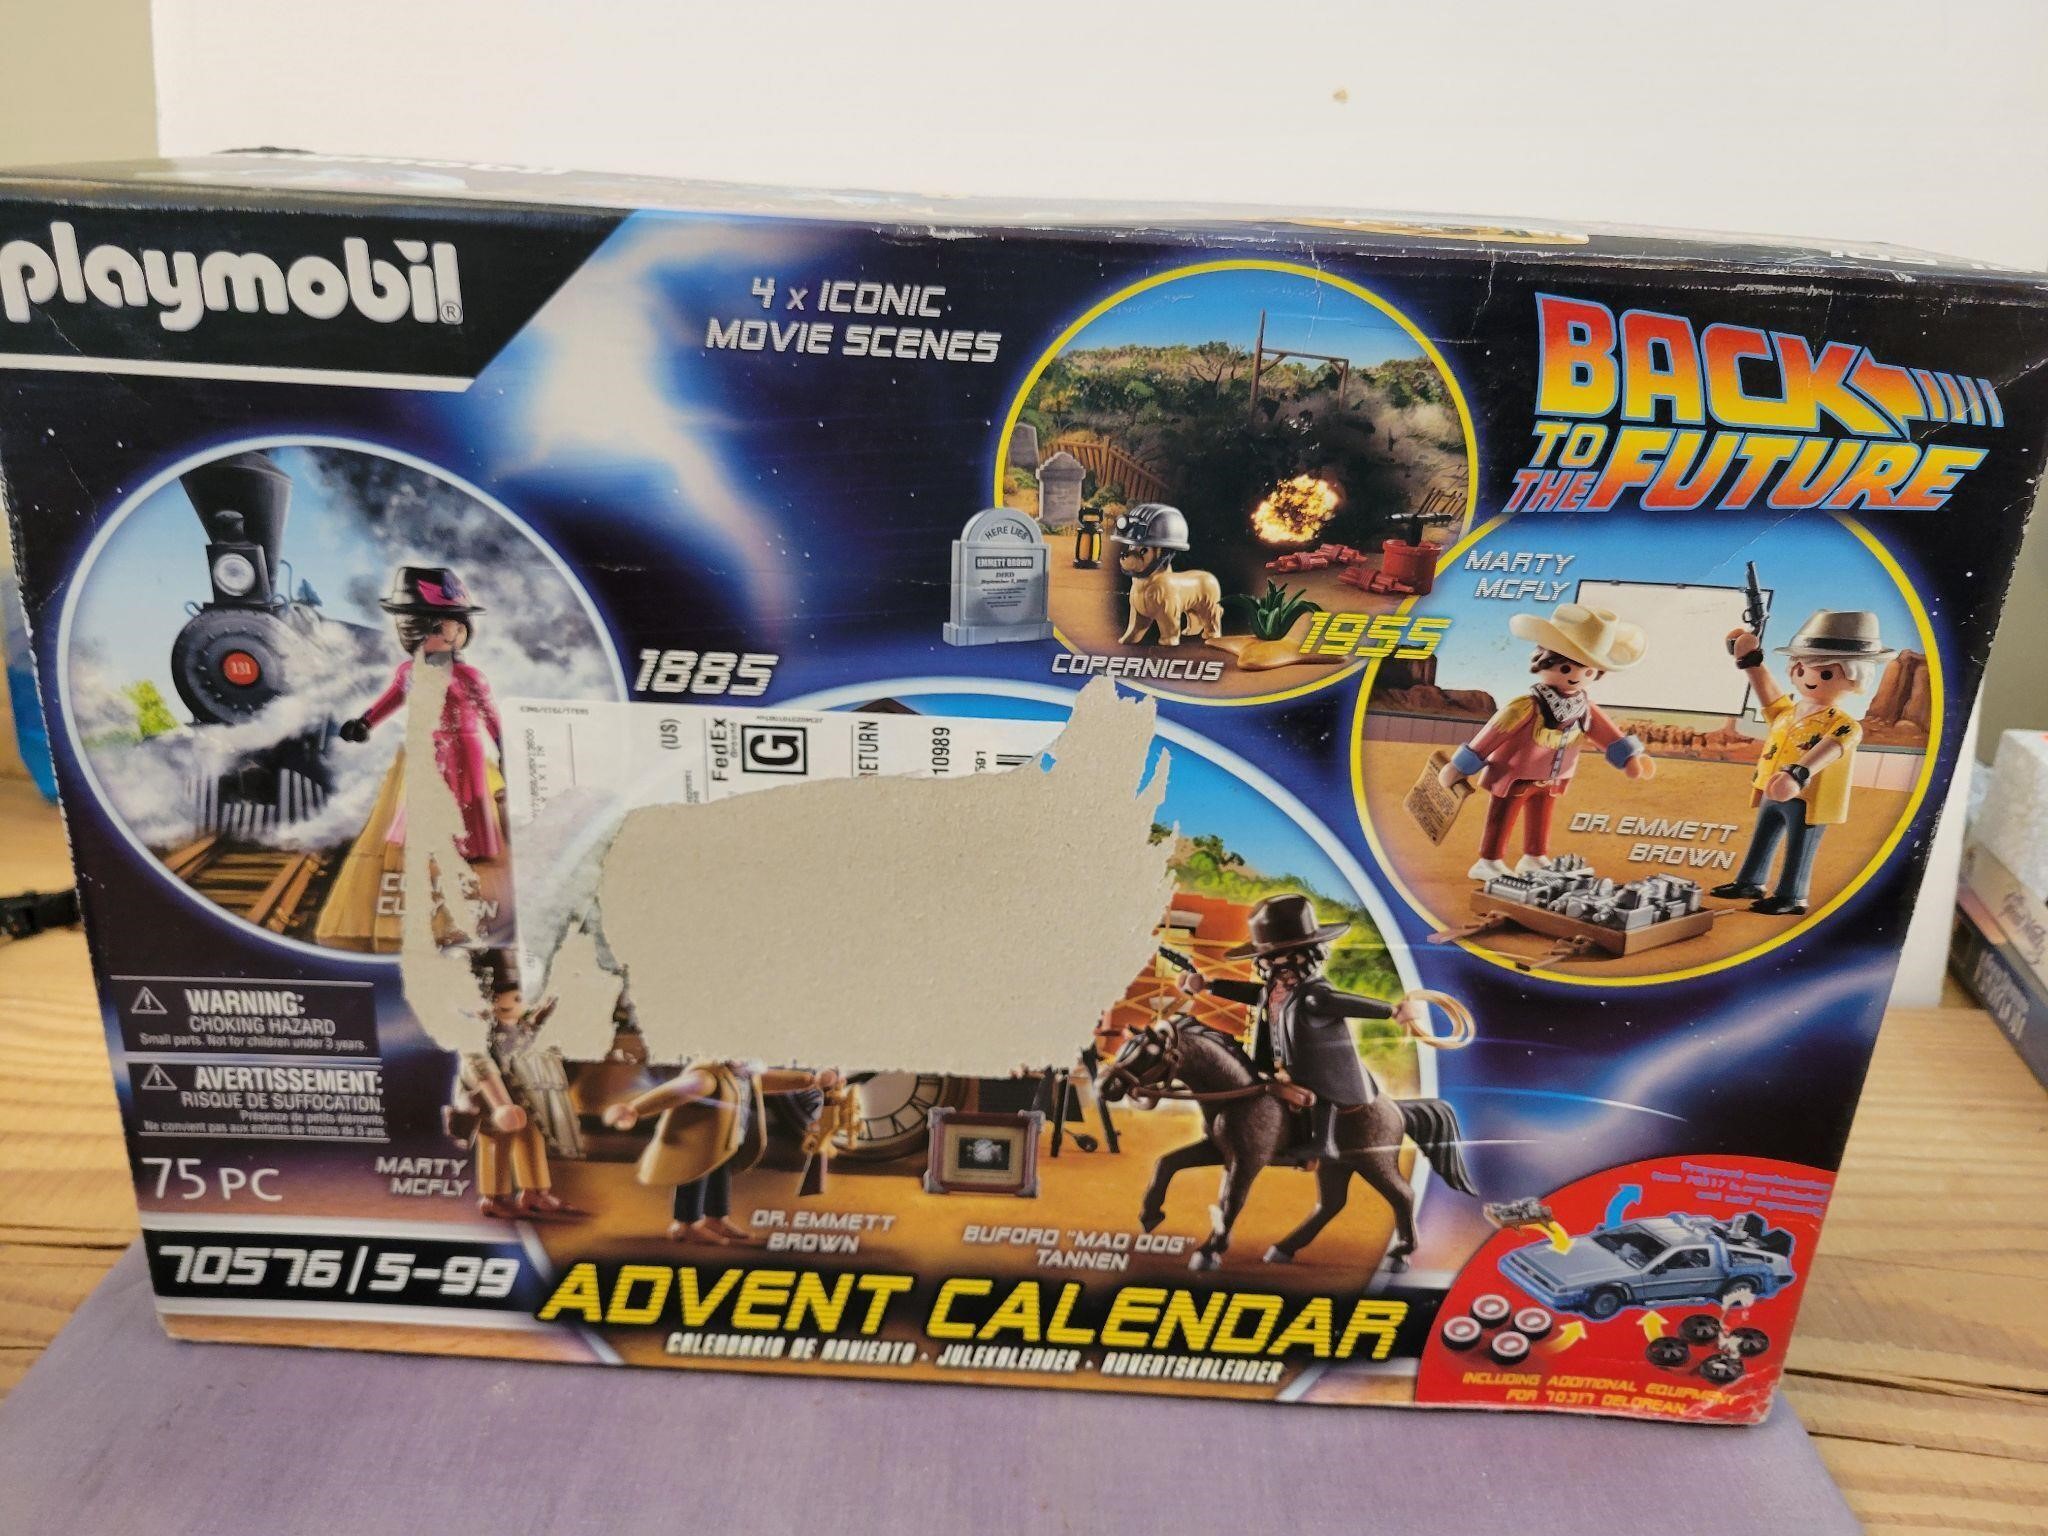 Playmobil Back to the Future Advent Calender